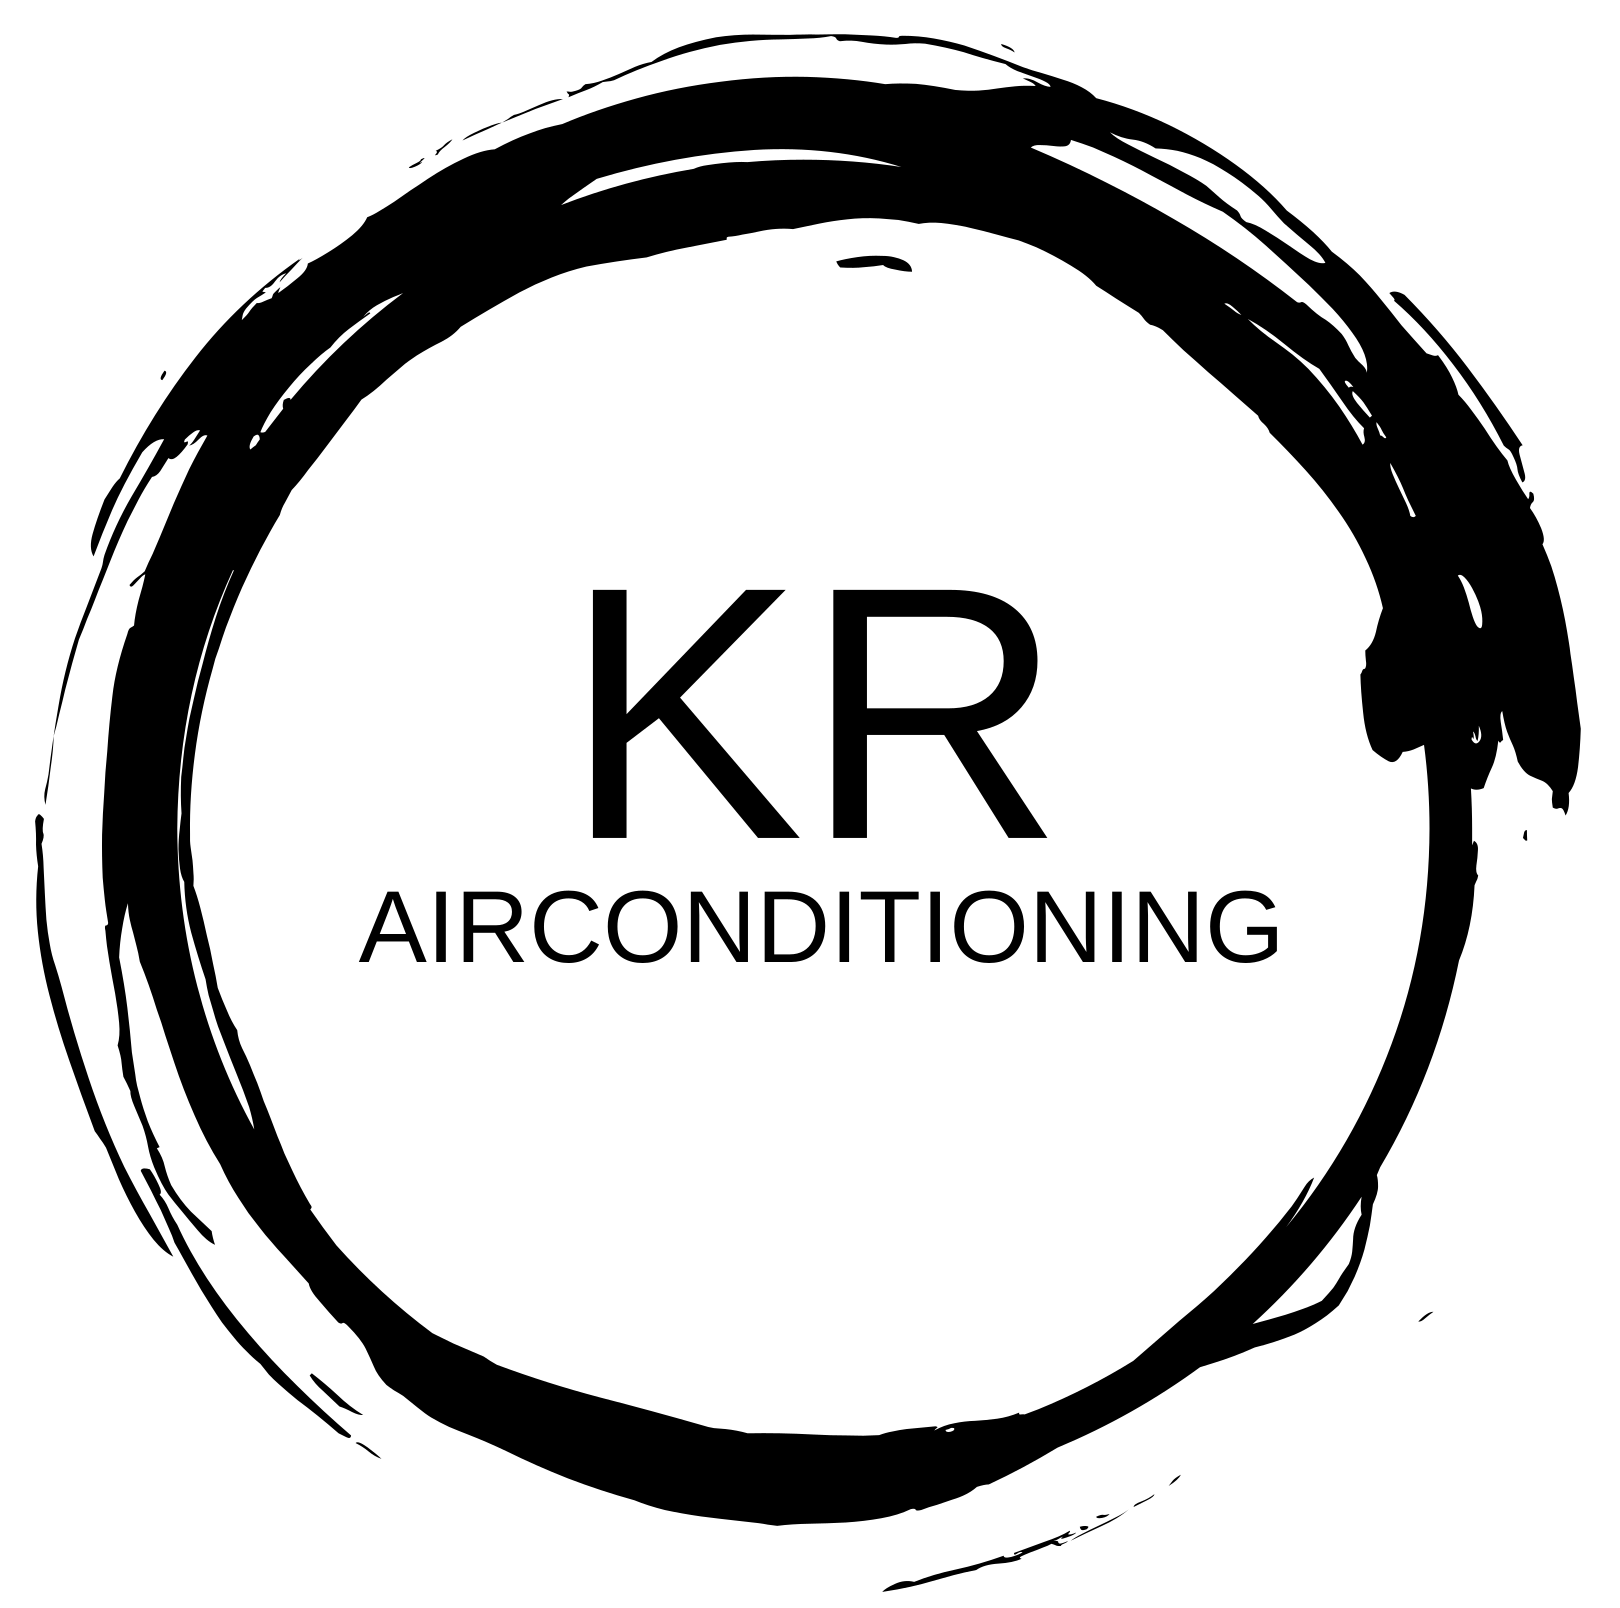 KR Air Conditioning in the Hunter Valley